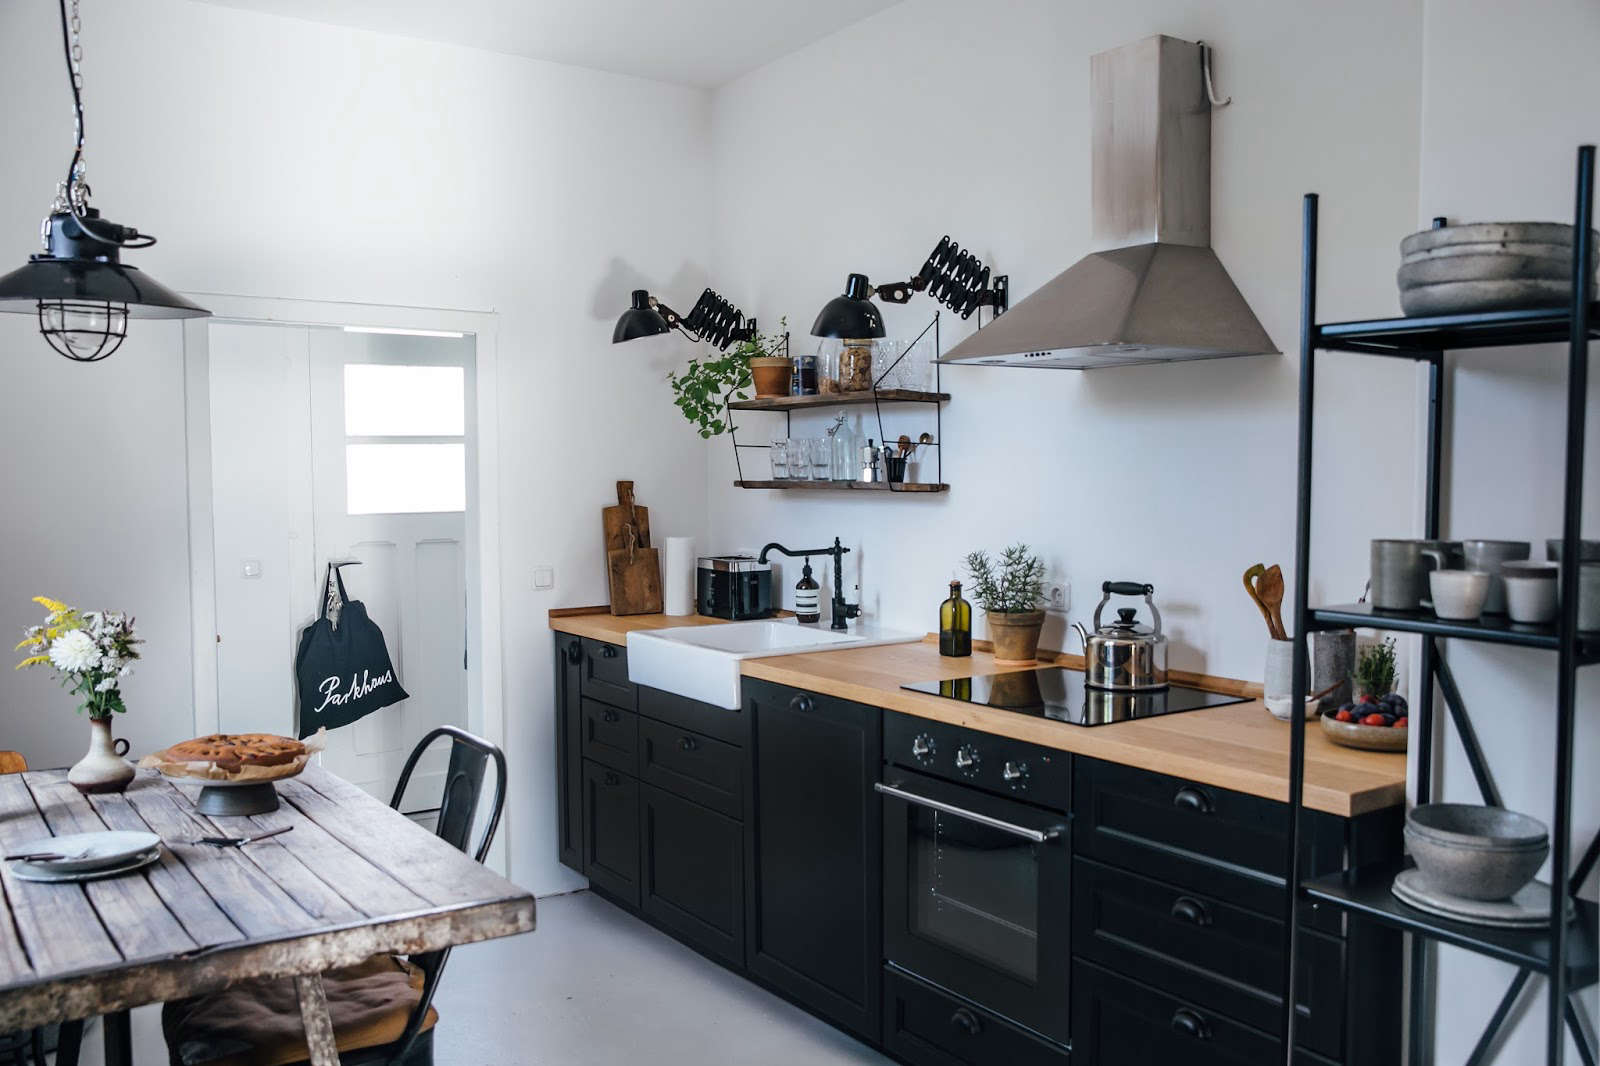 Kitchen of the Week: A DIY Ikea Country Kitchen for Two Berlin